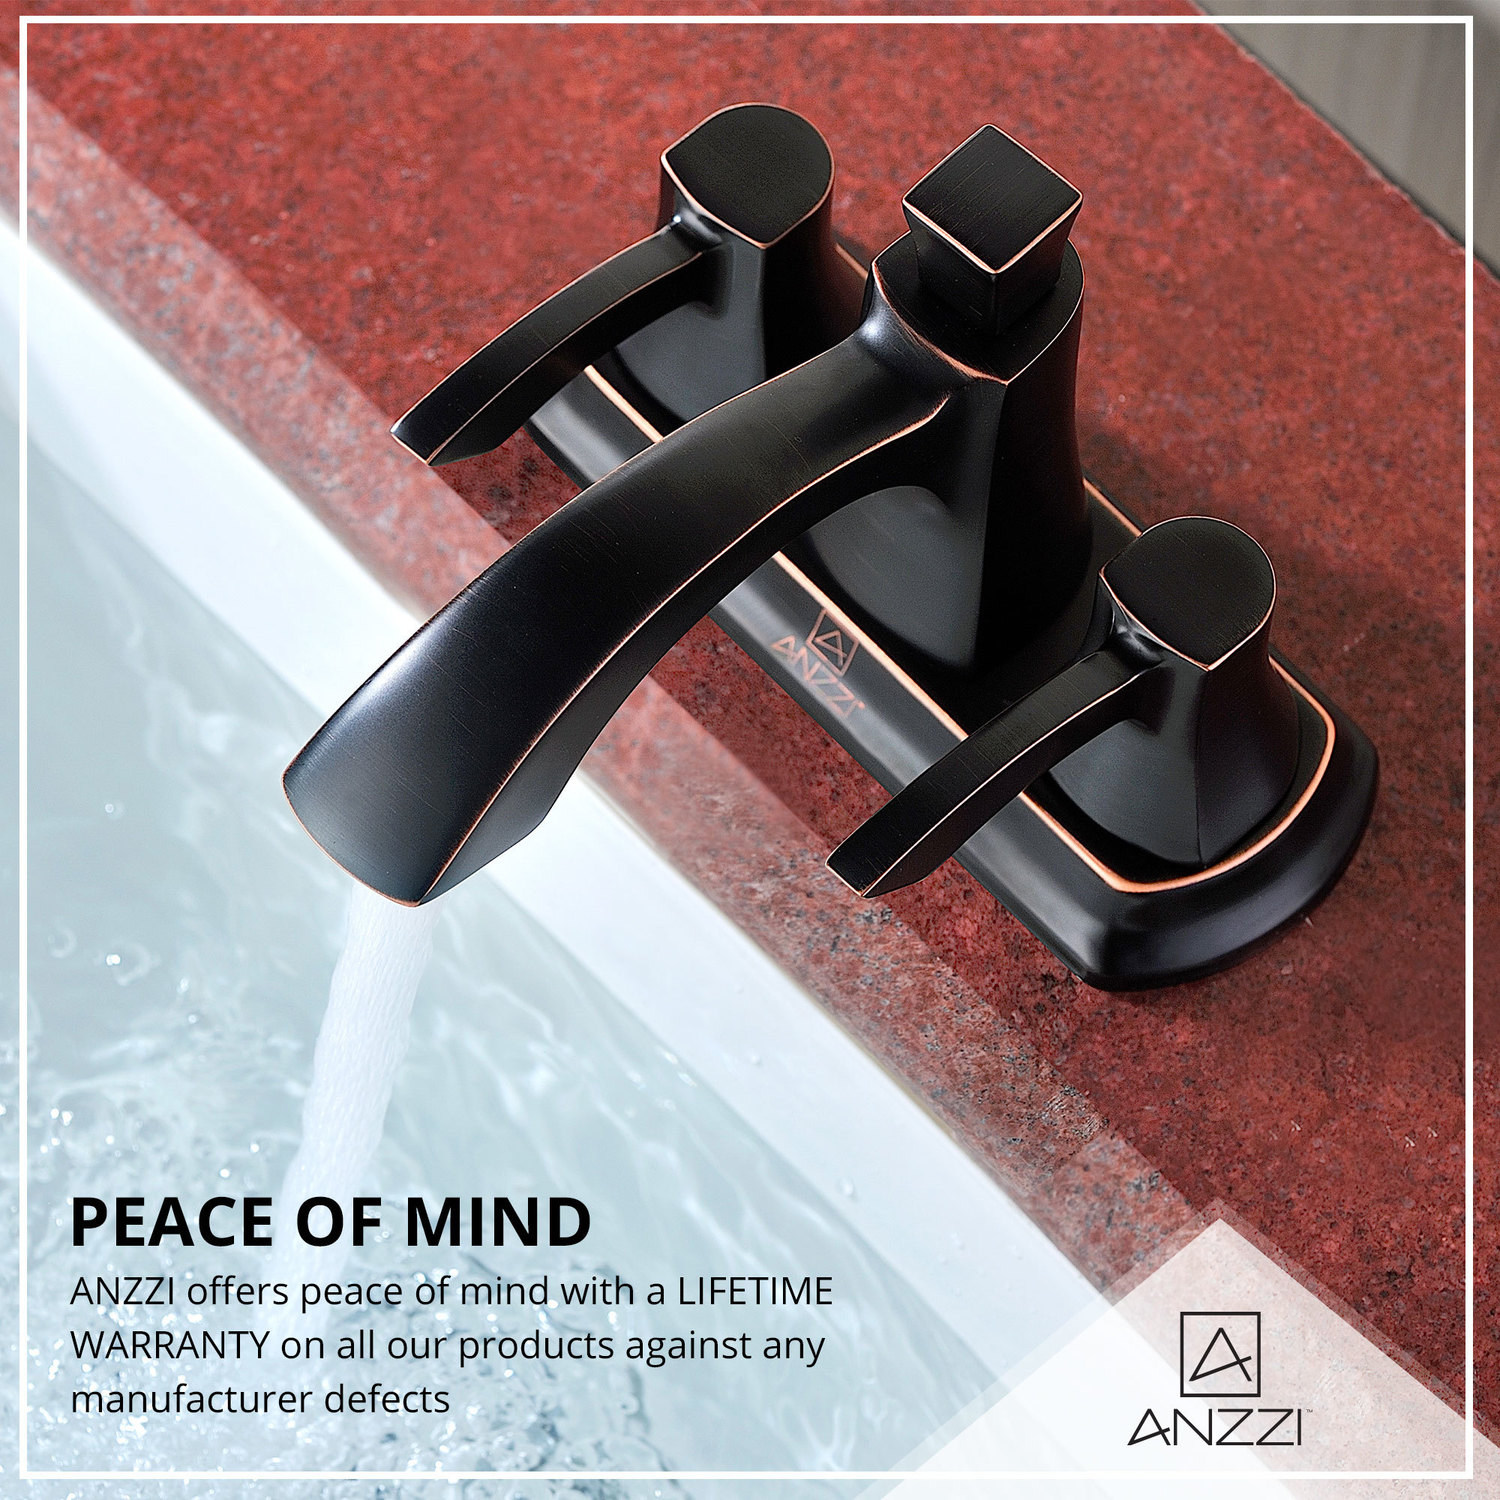 bathroom sink faucet manufacturers Anzzi BATHROOM - Faucets - Bathroom Sink Faucets - Centerset Bronze